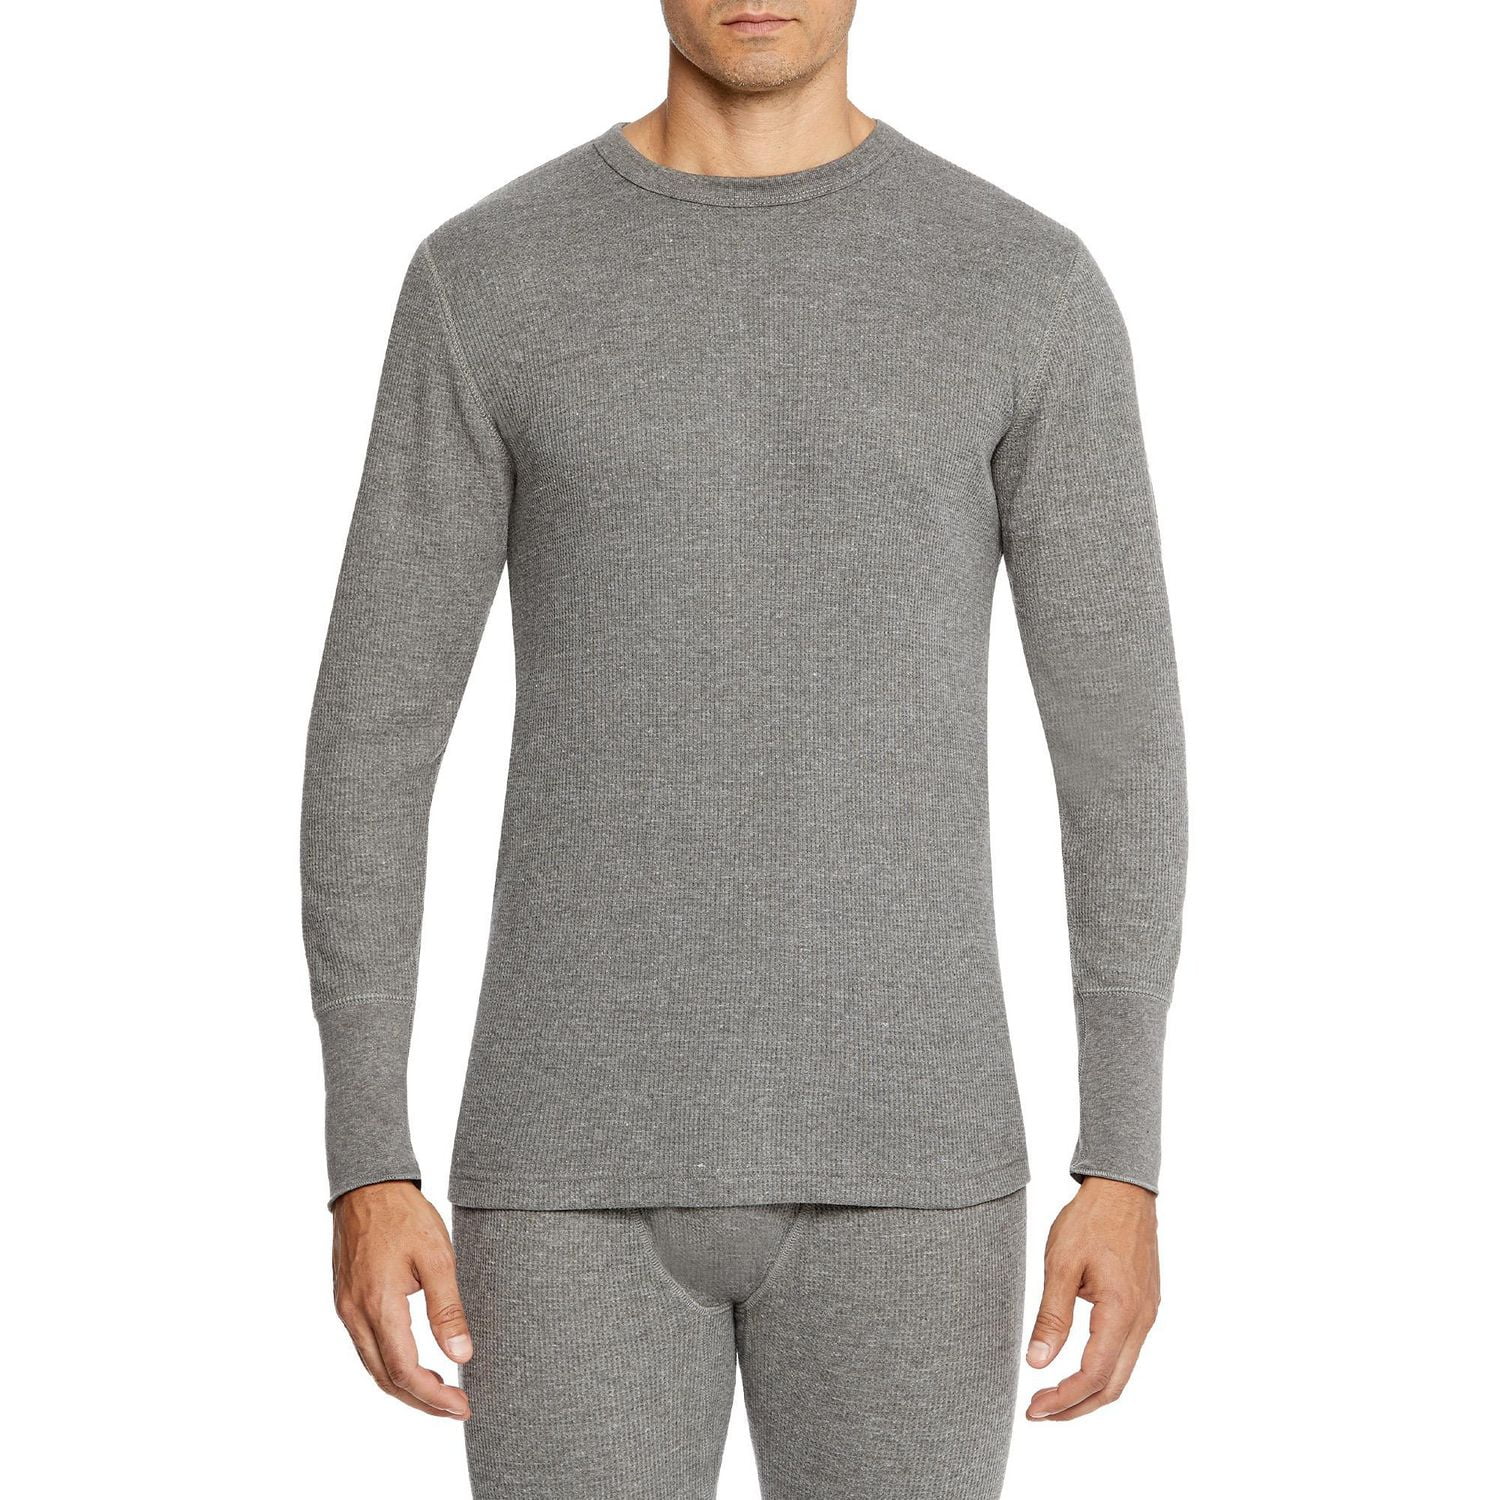 Standfield's Essential Waffle Knit Thermal 